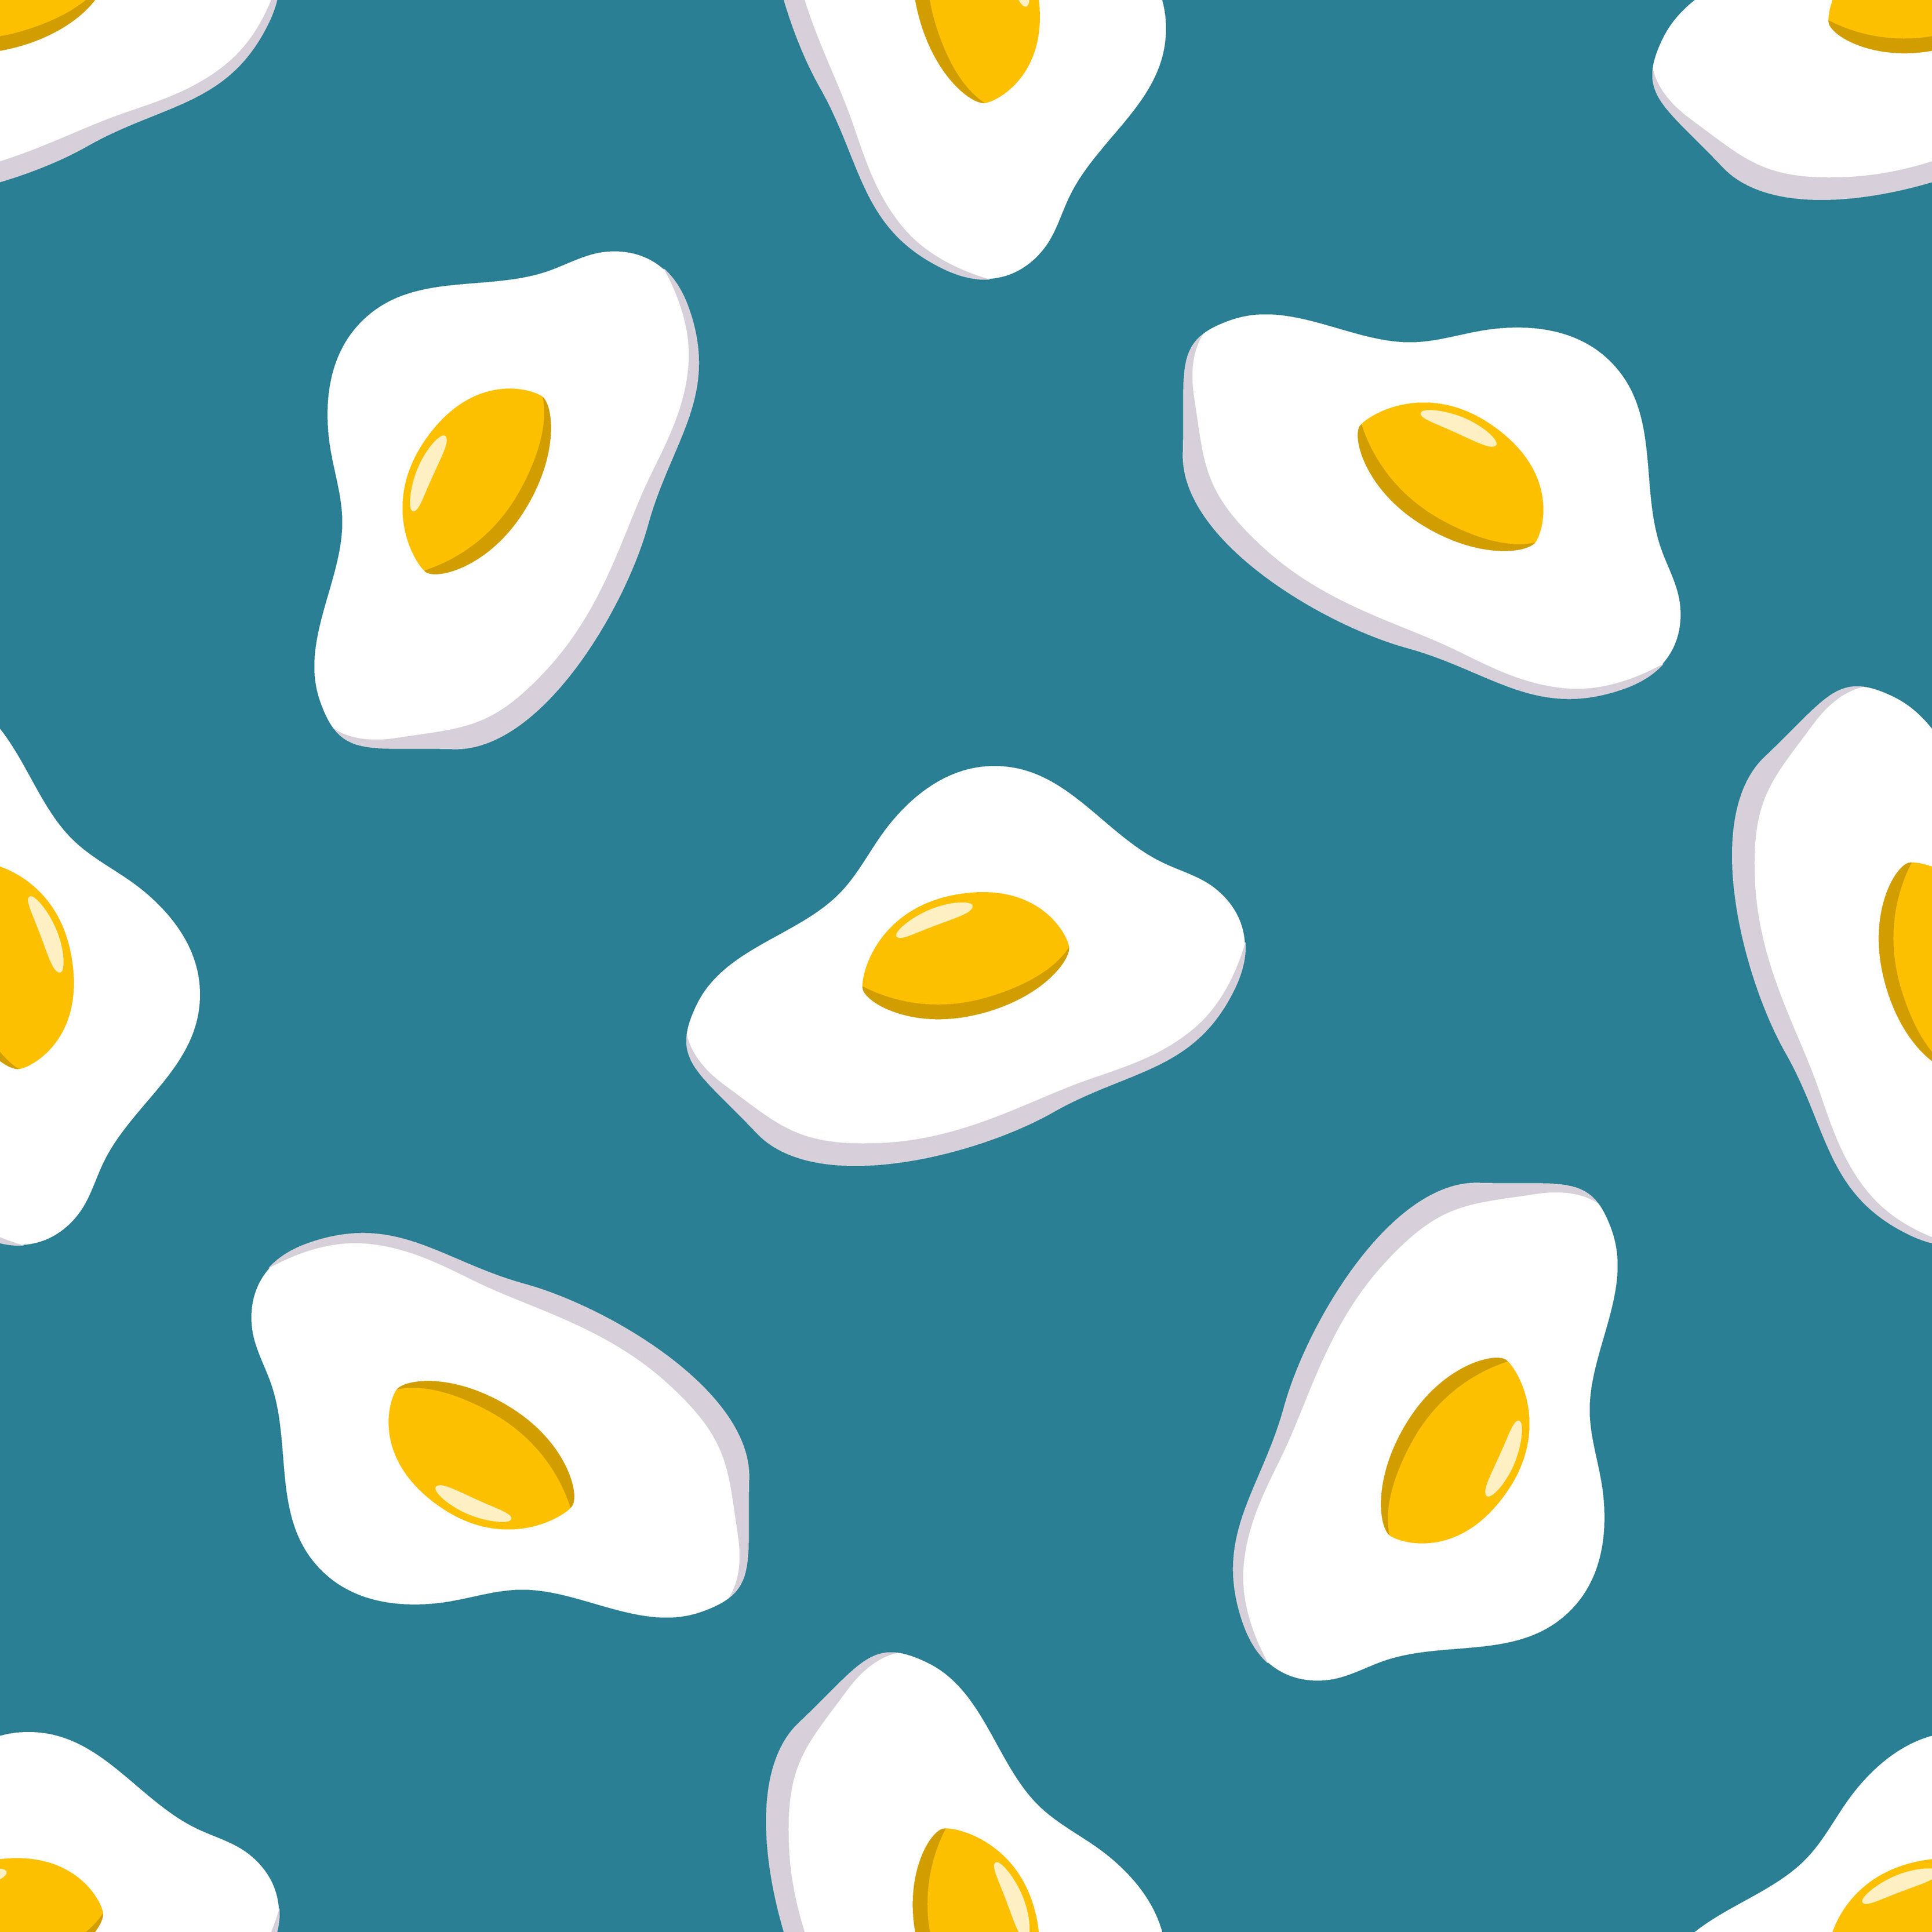 A seamless pattern of a broken egg with a yolk on a green background